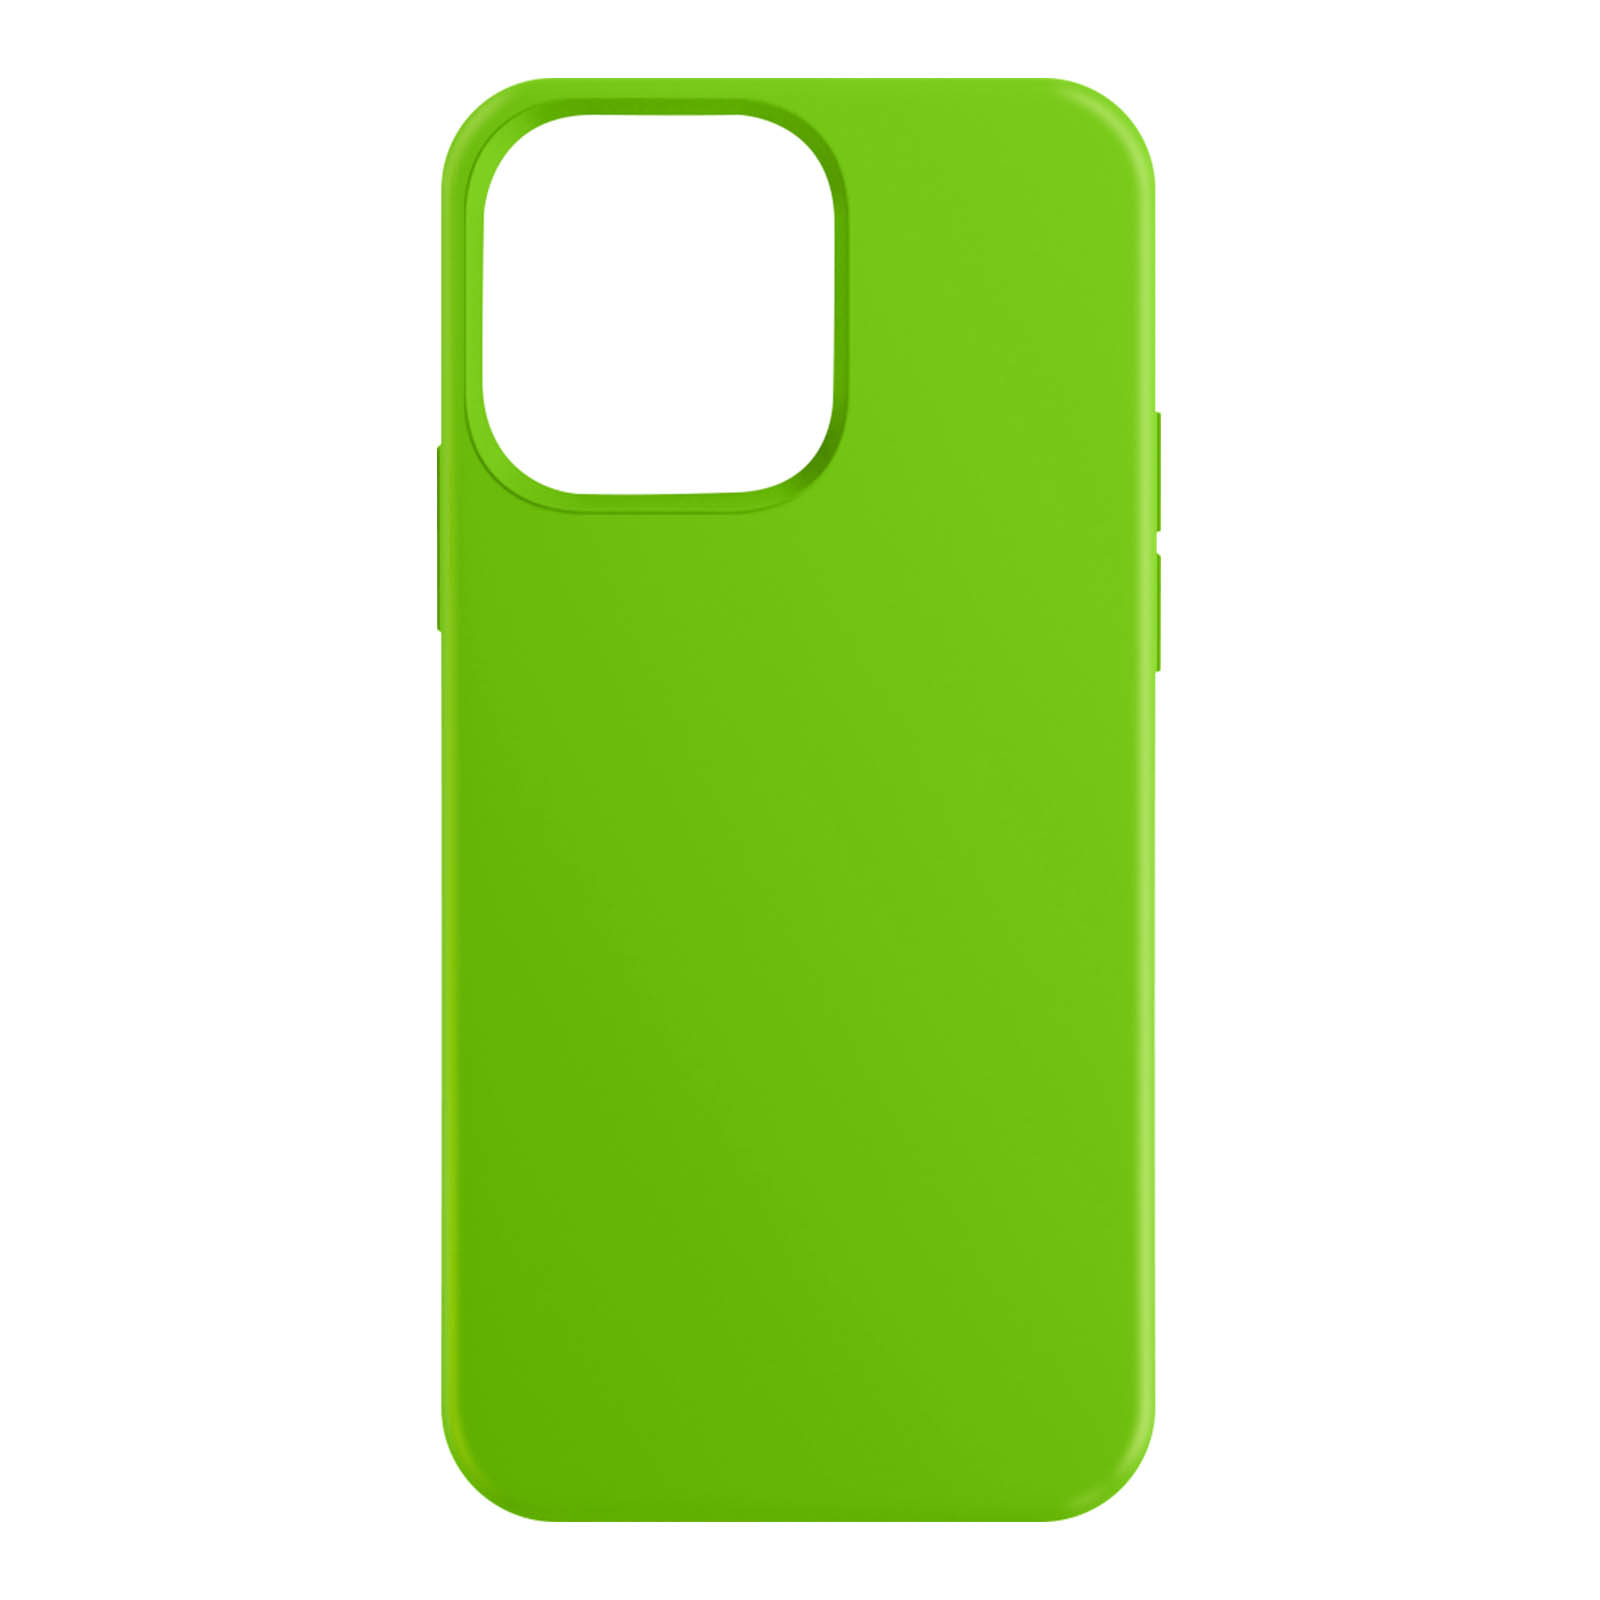 iPhone Max, 14 Series, Apple, MOXIE Pro BeFluo Zitronengrün Backcover,